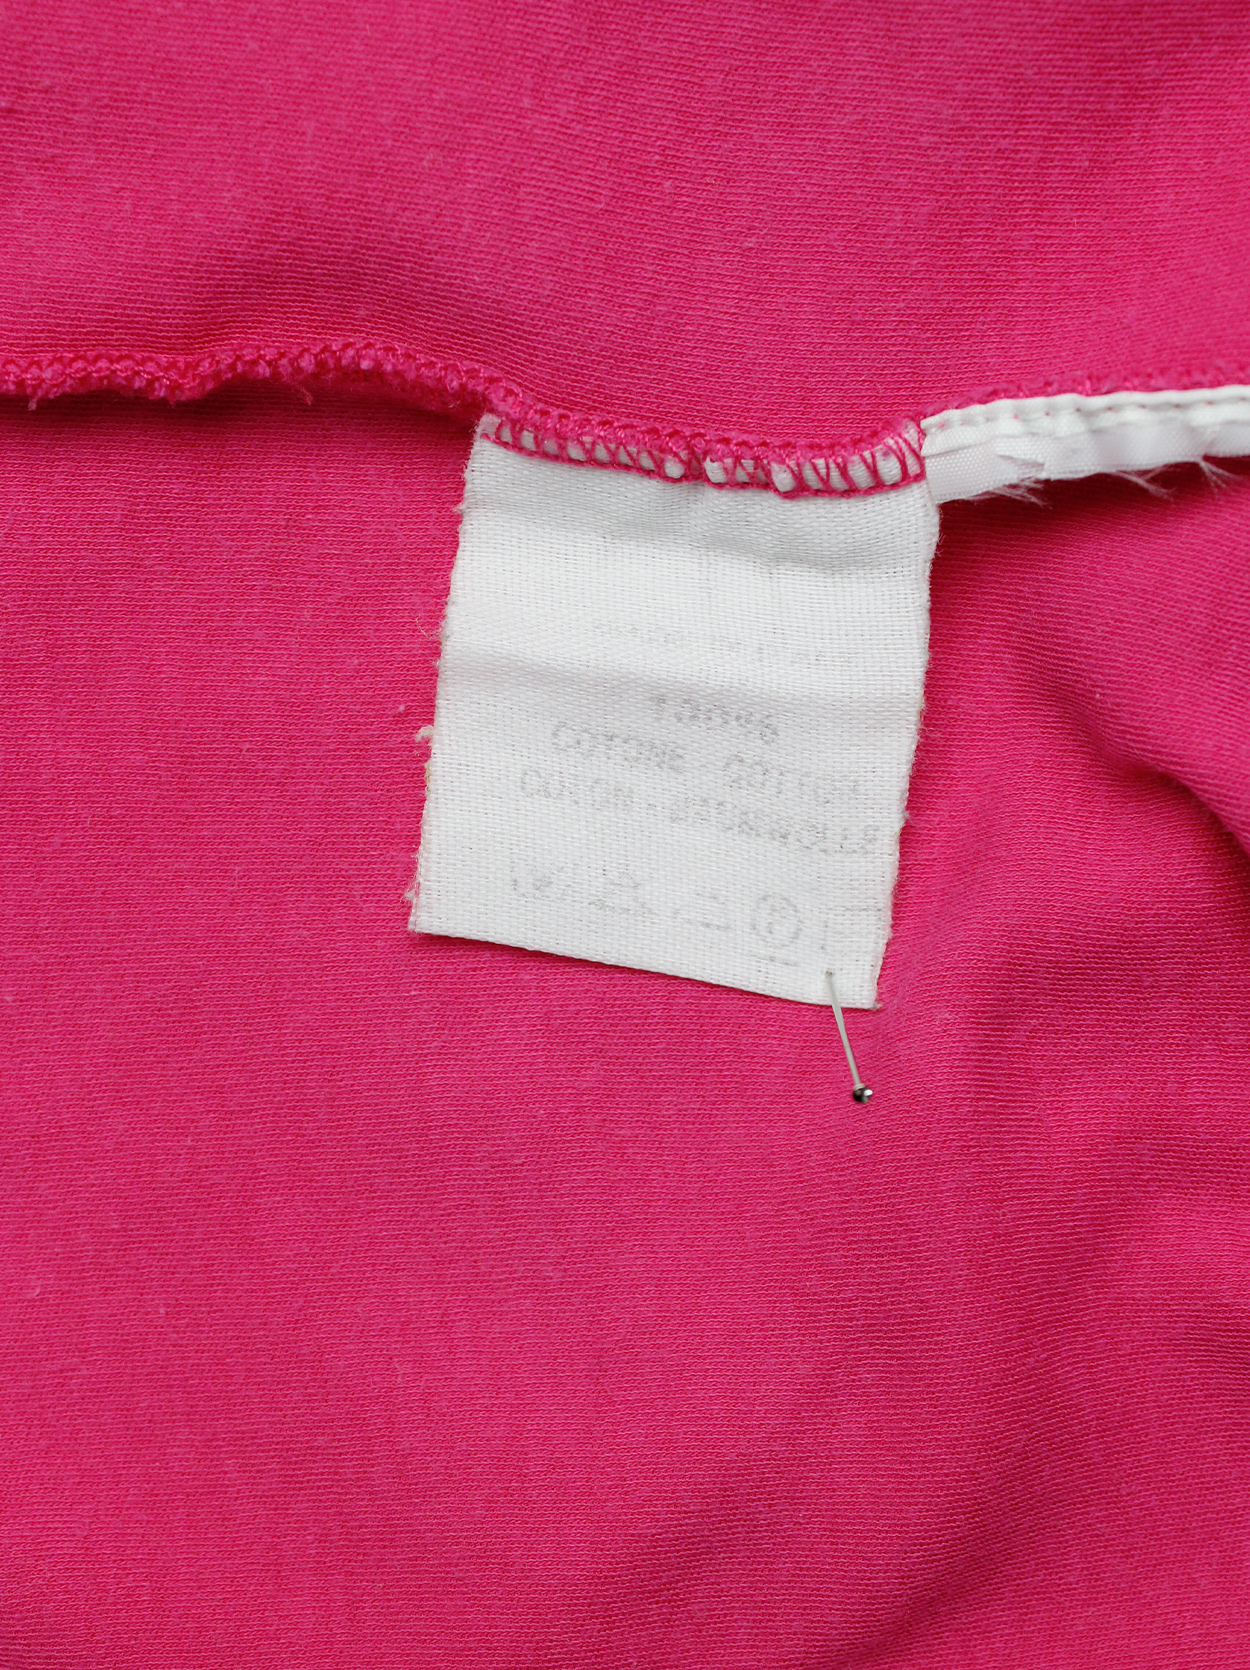 Maison Martin Margiela reproduction of a 1993 pink top with shoulder ...